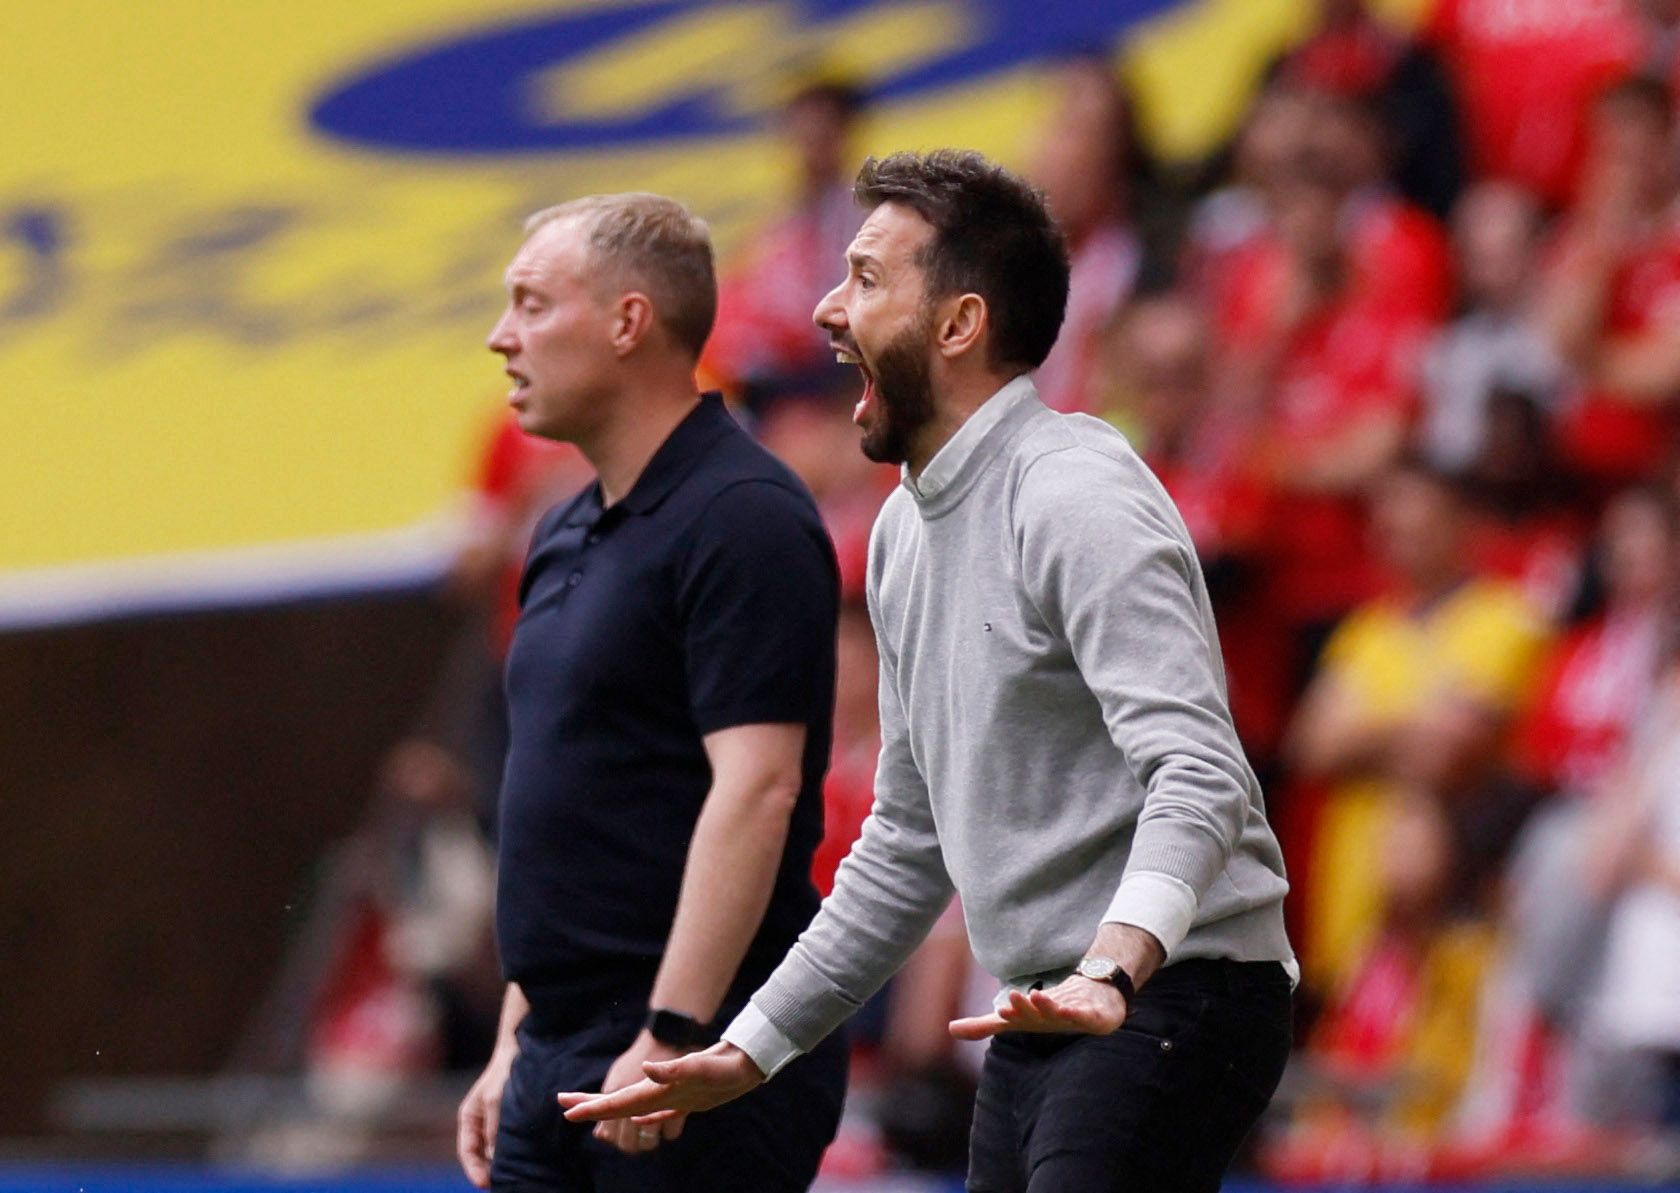 Soccer Football - Championship Play-Off Final - Huddersfield Town v Nottingham Forest - Wembley Stadium, London, Britain - May 29, 2022 Nottingham Forest manager Steve Cooper and Huddersfield Town manager Carlos Corberan Action Images via Reuters/Andrew Couldridge